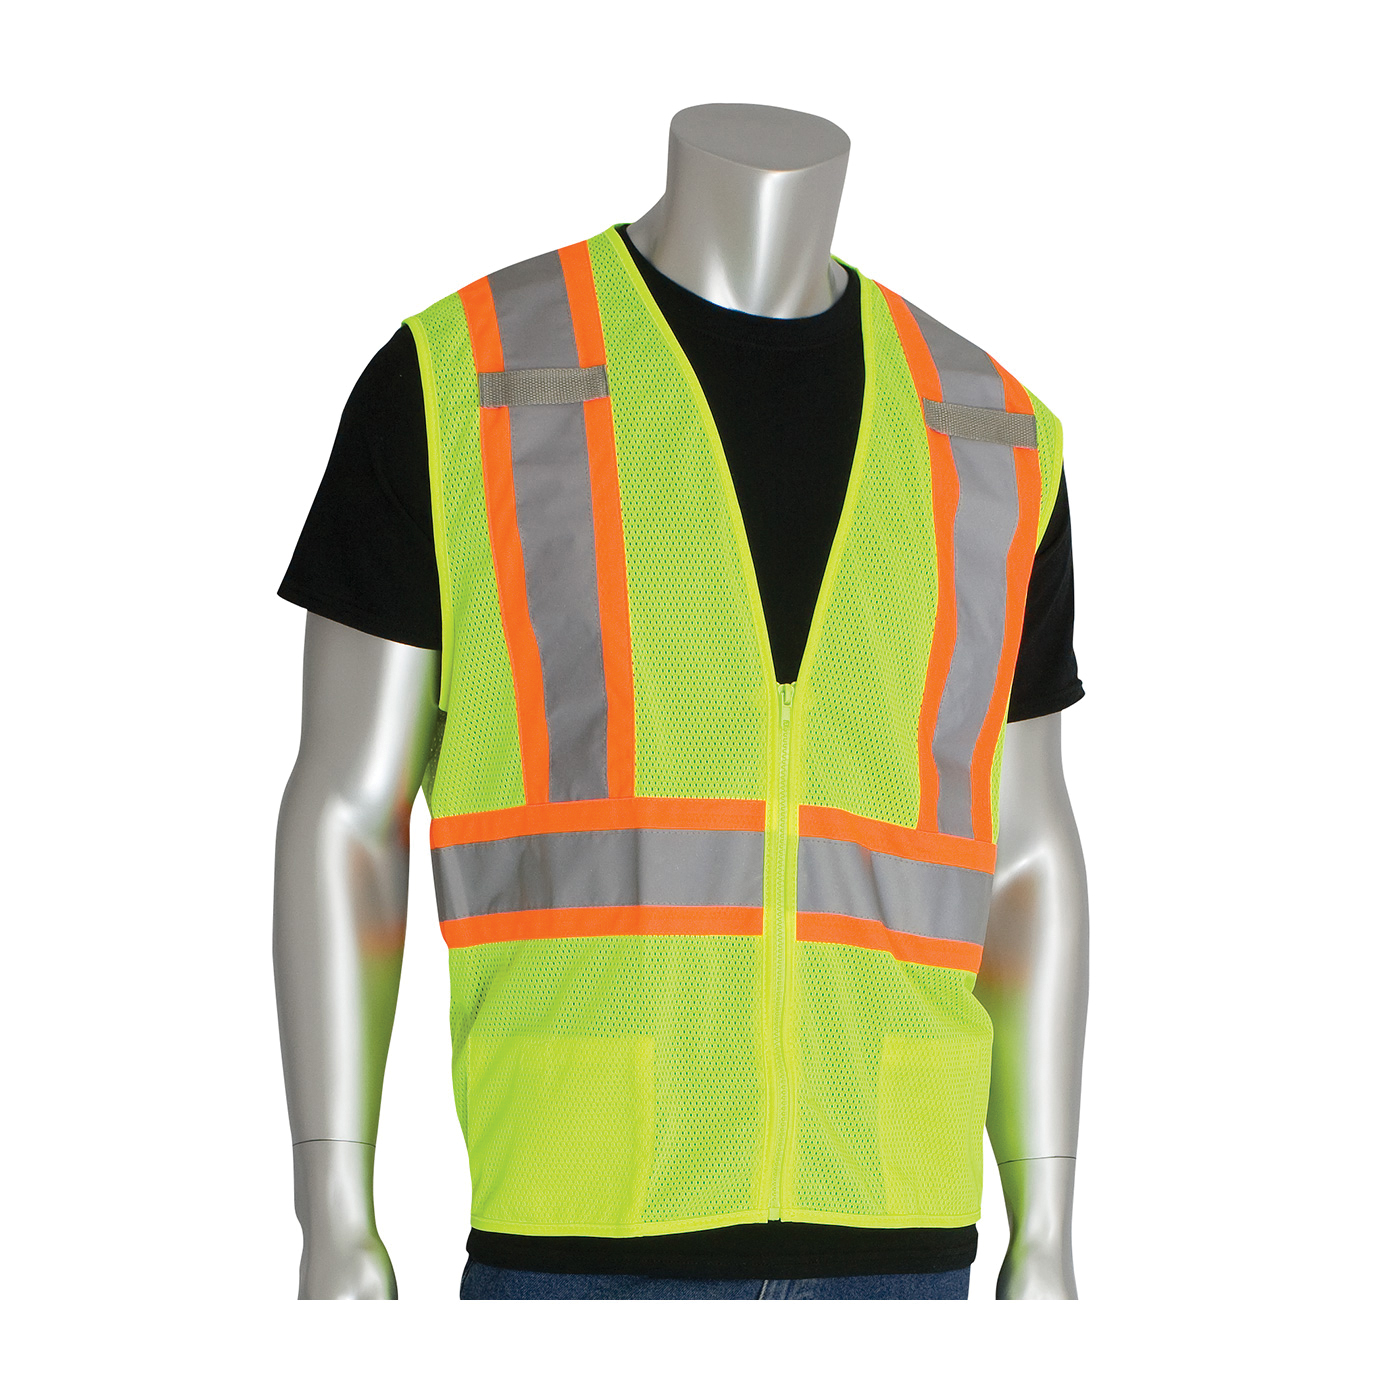 PIP® 302-0600D-LY/3X 2-Tone Safety Access Vest With "D" Ring Access, 3XL, Hi-Viz Lime Yellow, Polyester, Zipper Closure, 2 Pockets, ANSI Class: Class 2, Specifications Met: ANSI 107 Type R